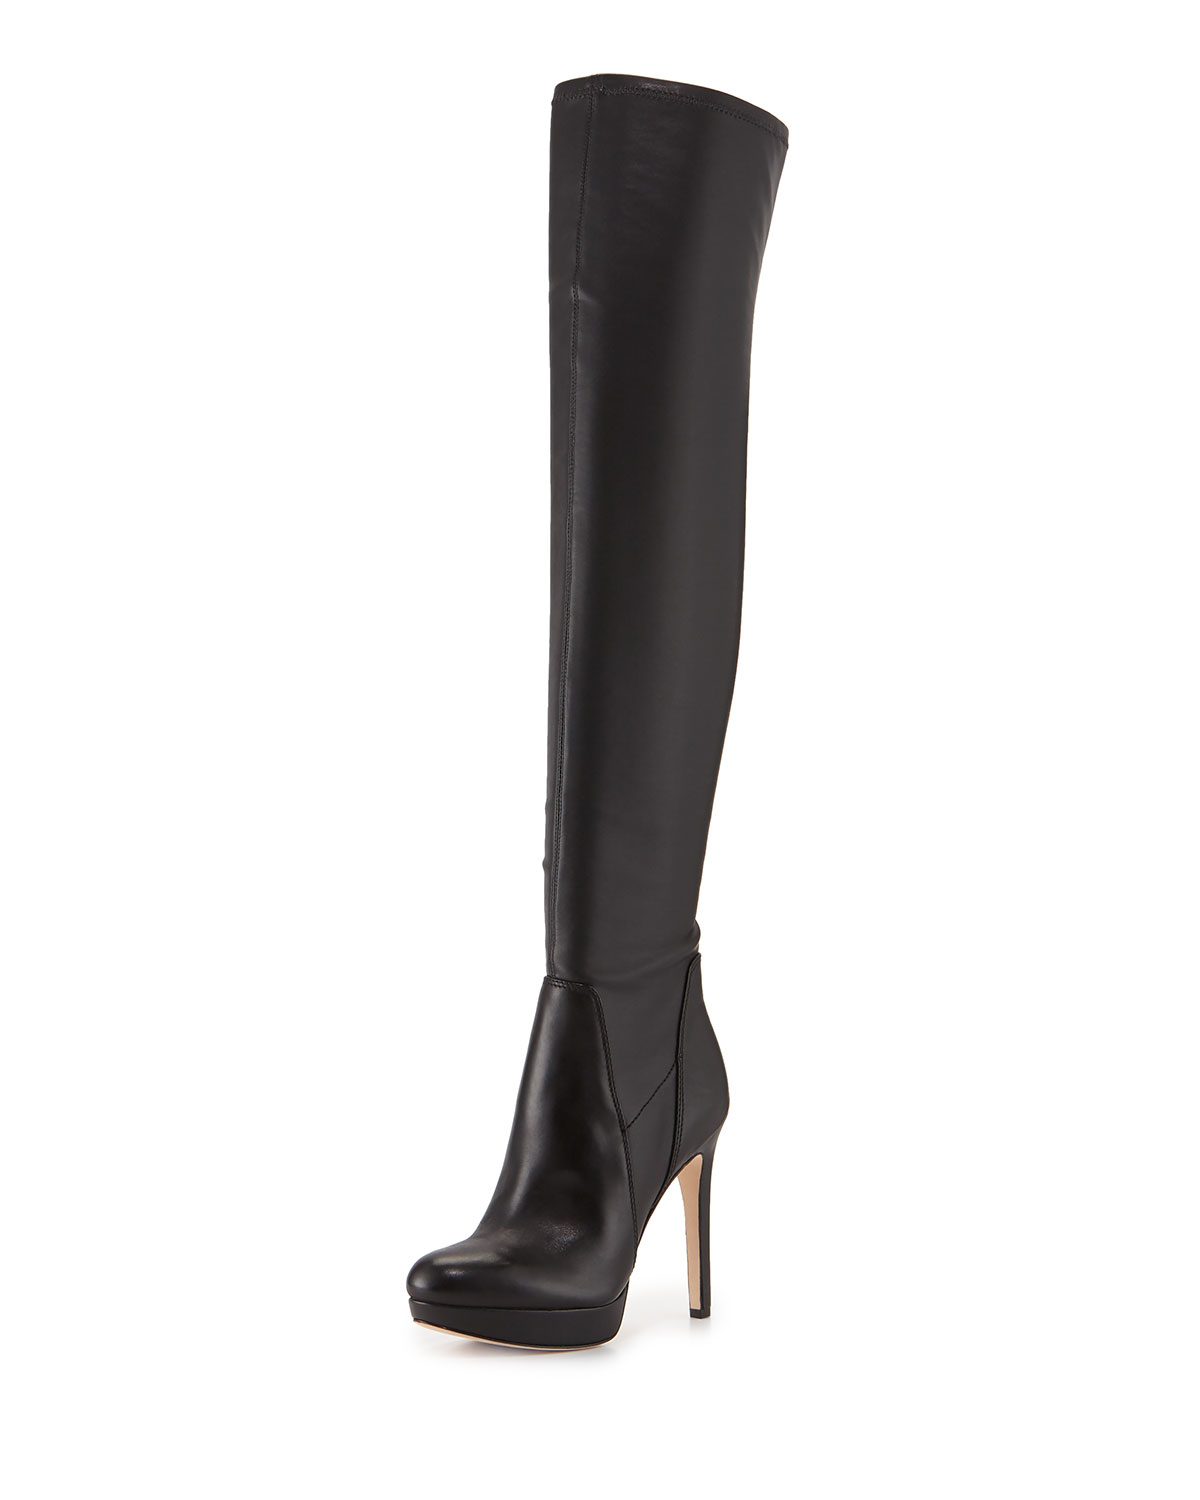 Sam edelman Amber Faux-Leather Over-The-Knee Boots in Black | Lyst